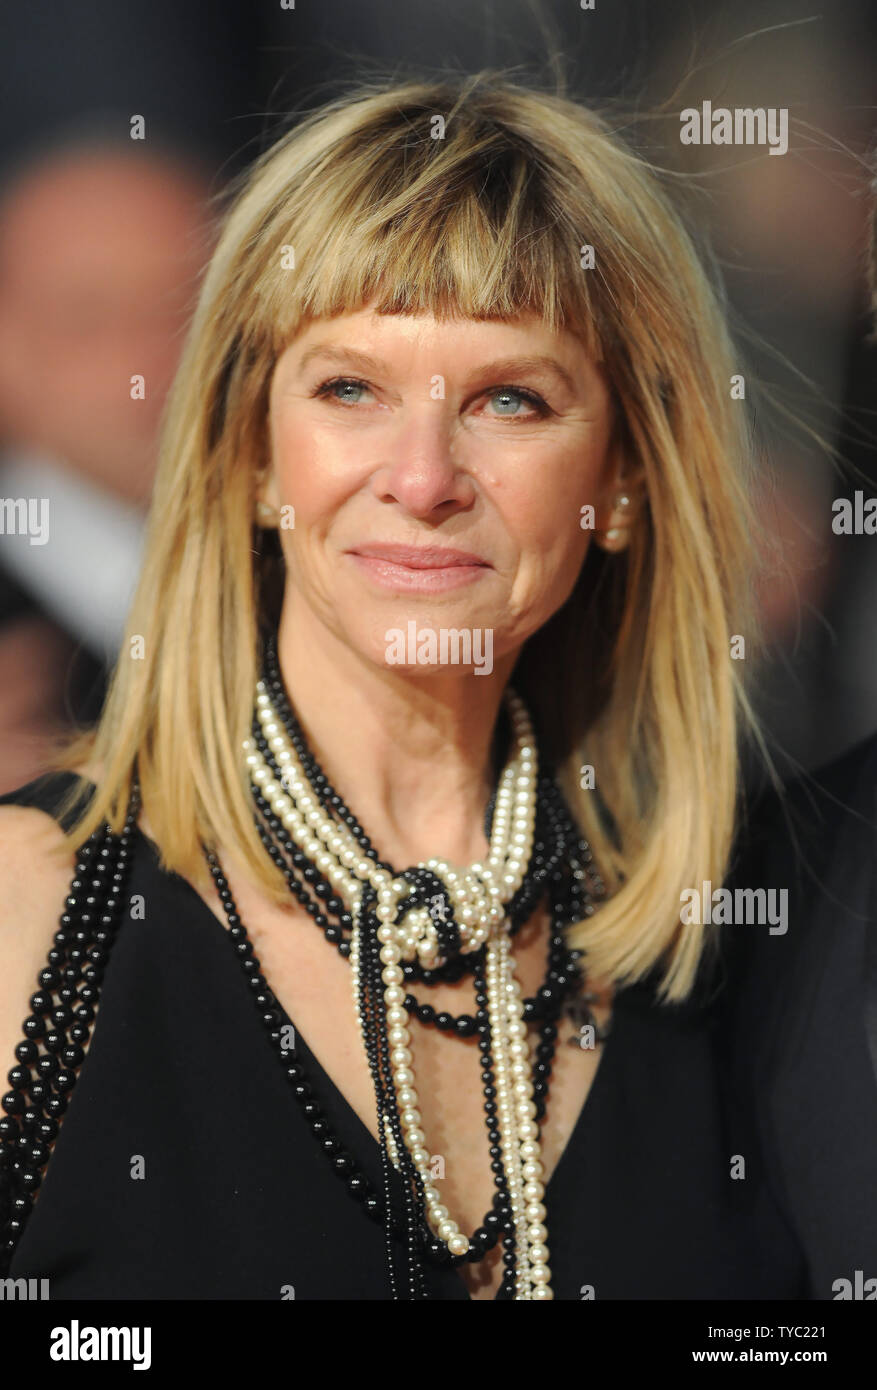 Kate capshaw facelift